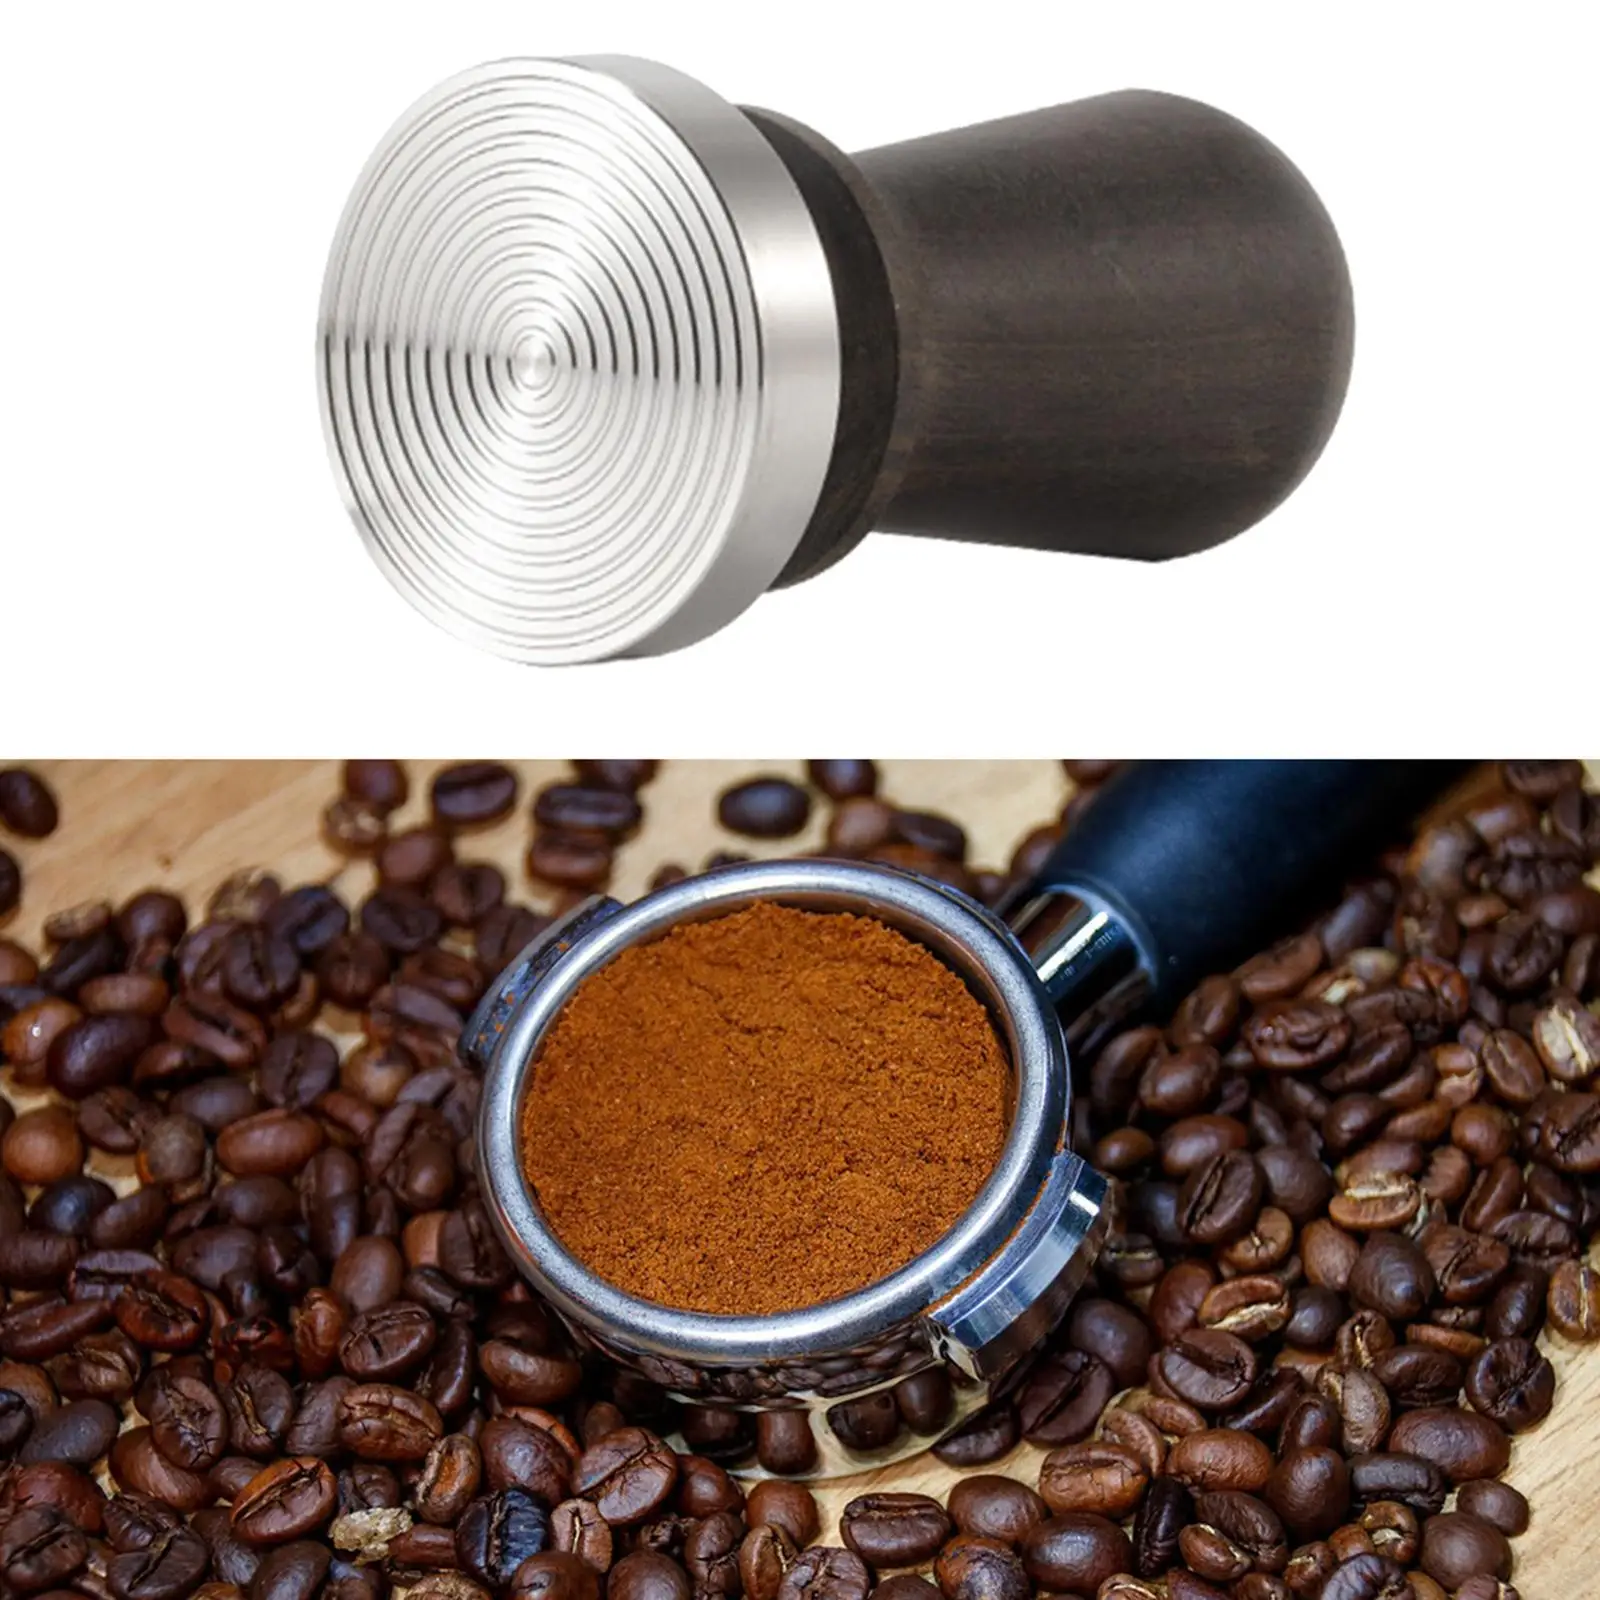 Calibrated Espresso Tamper Stainless Steel Base for Portafilter Coffee Machine Exquisite Appearance Coffee Ground Press Compact